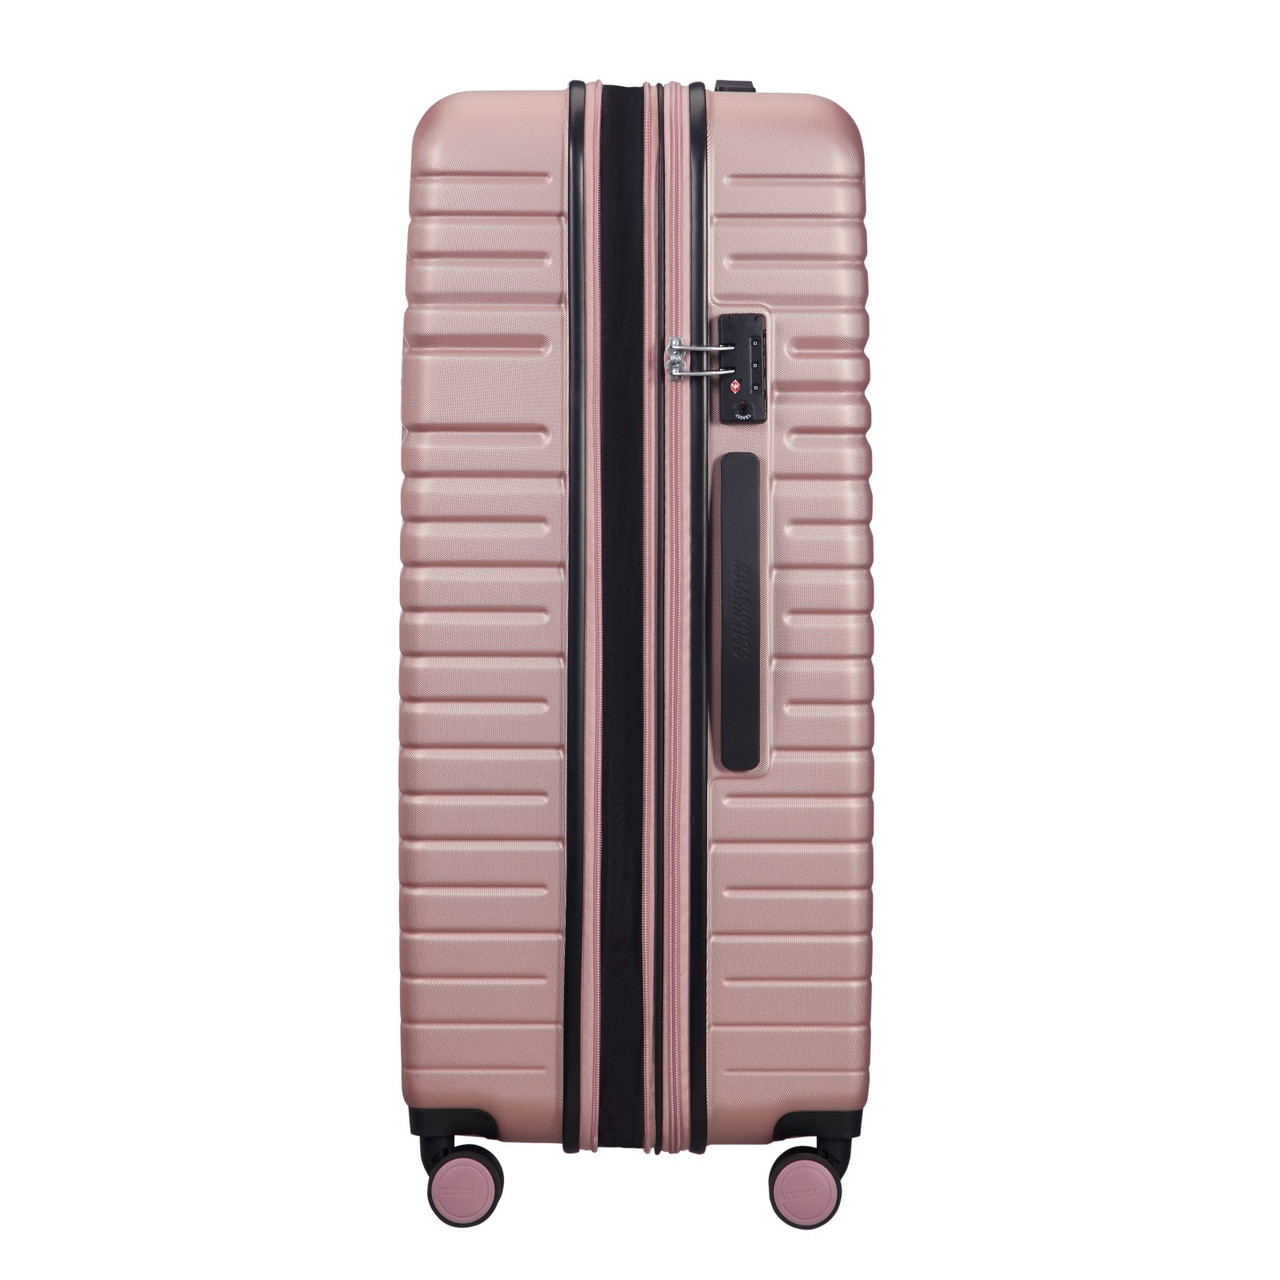 American Aero Racer 79cm Expandable Luggage Superstore